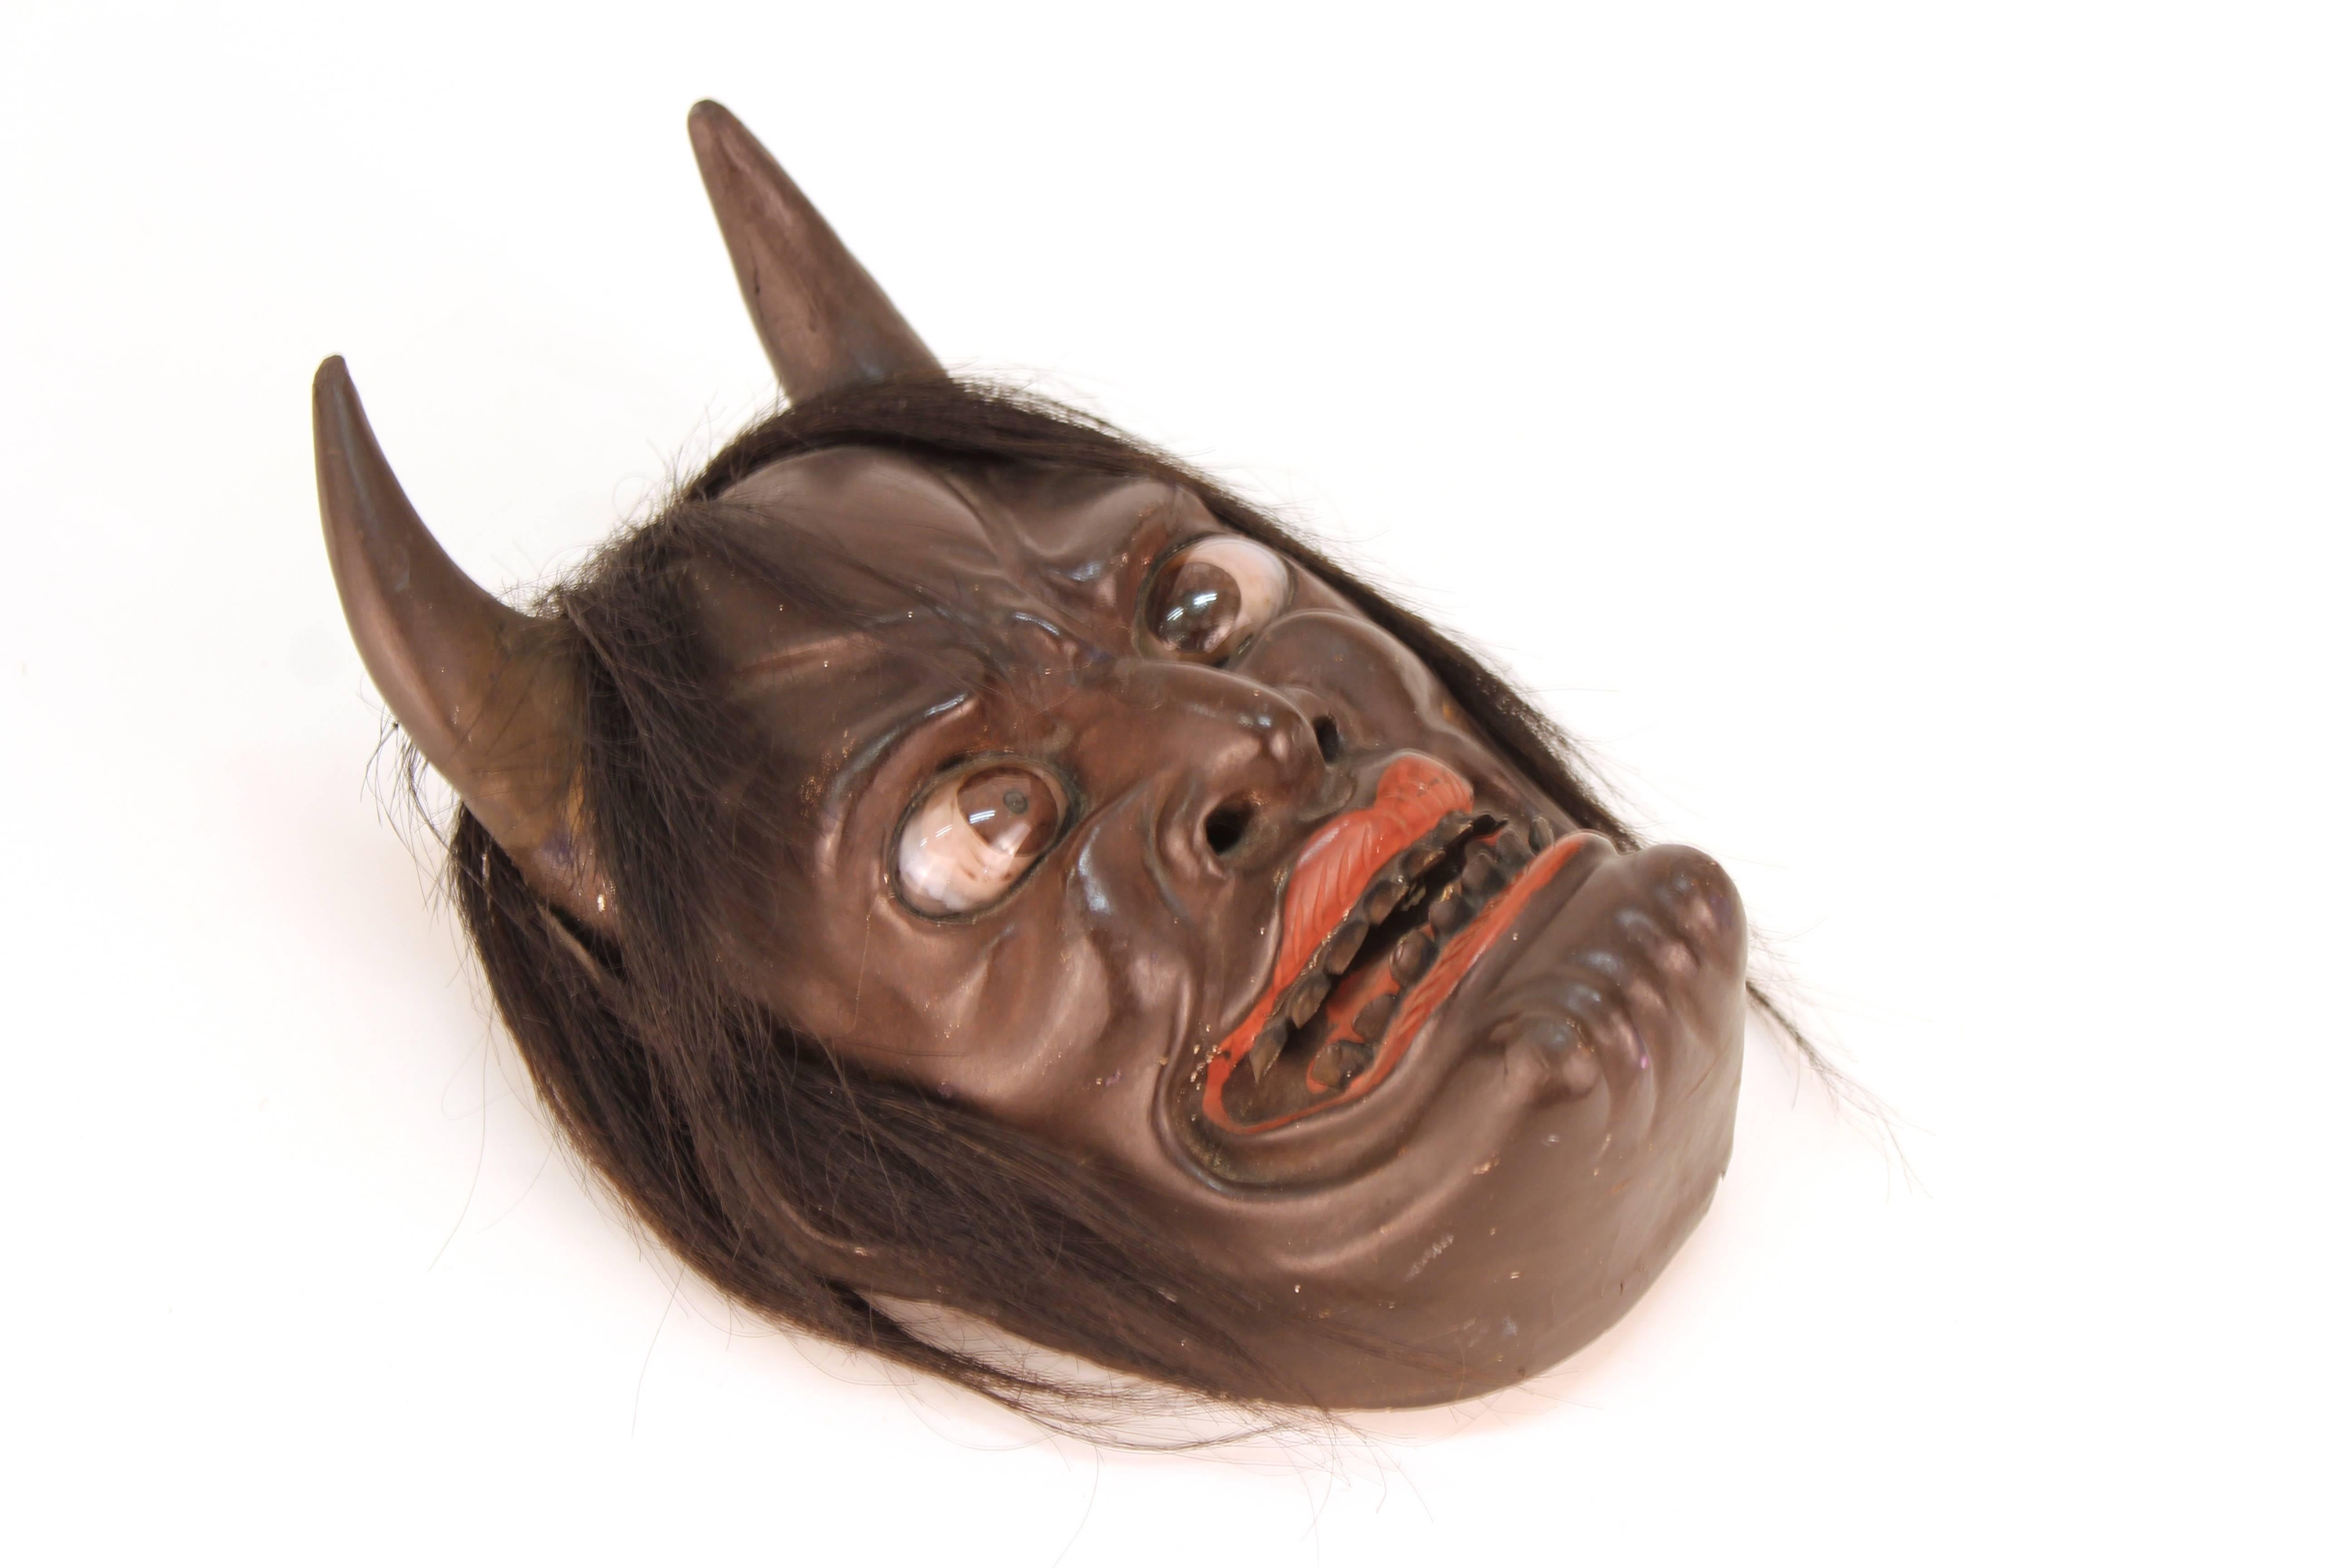 A Japanese sculpted wood Ike mask produced during the Edo Period (1603-1868) around 1850, depicting a devil face. Highly detailed, the mask has inserted eyes and hair attached to it.